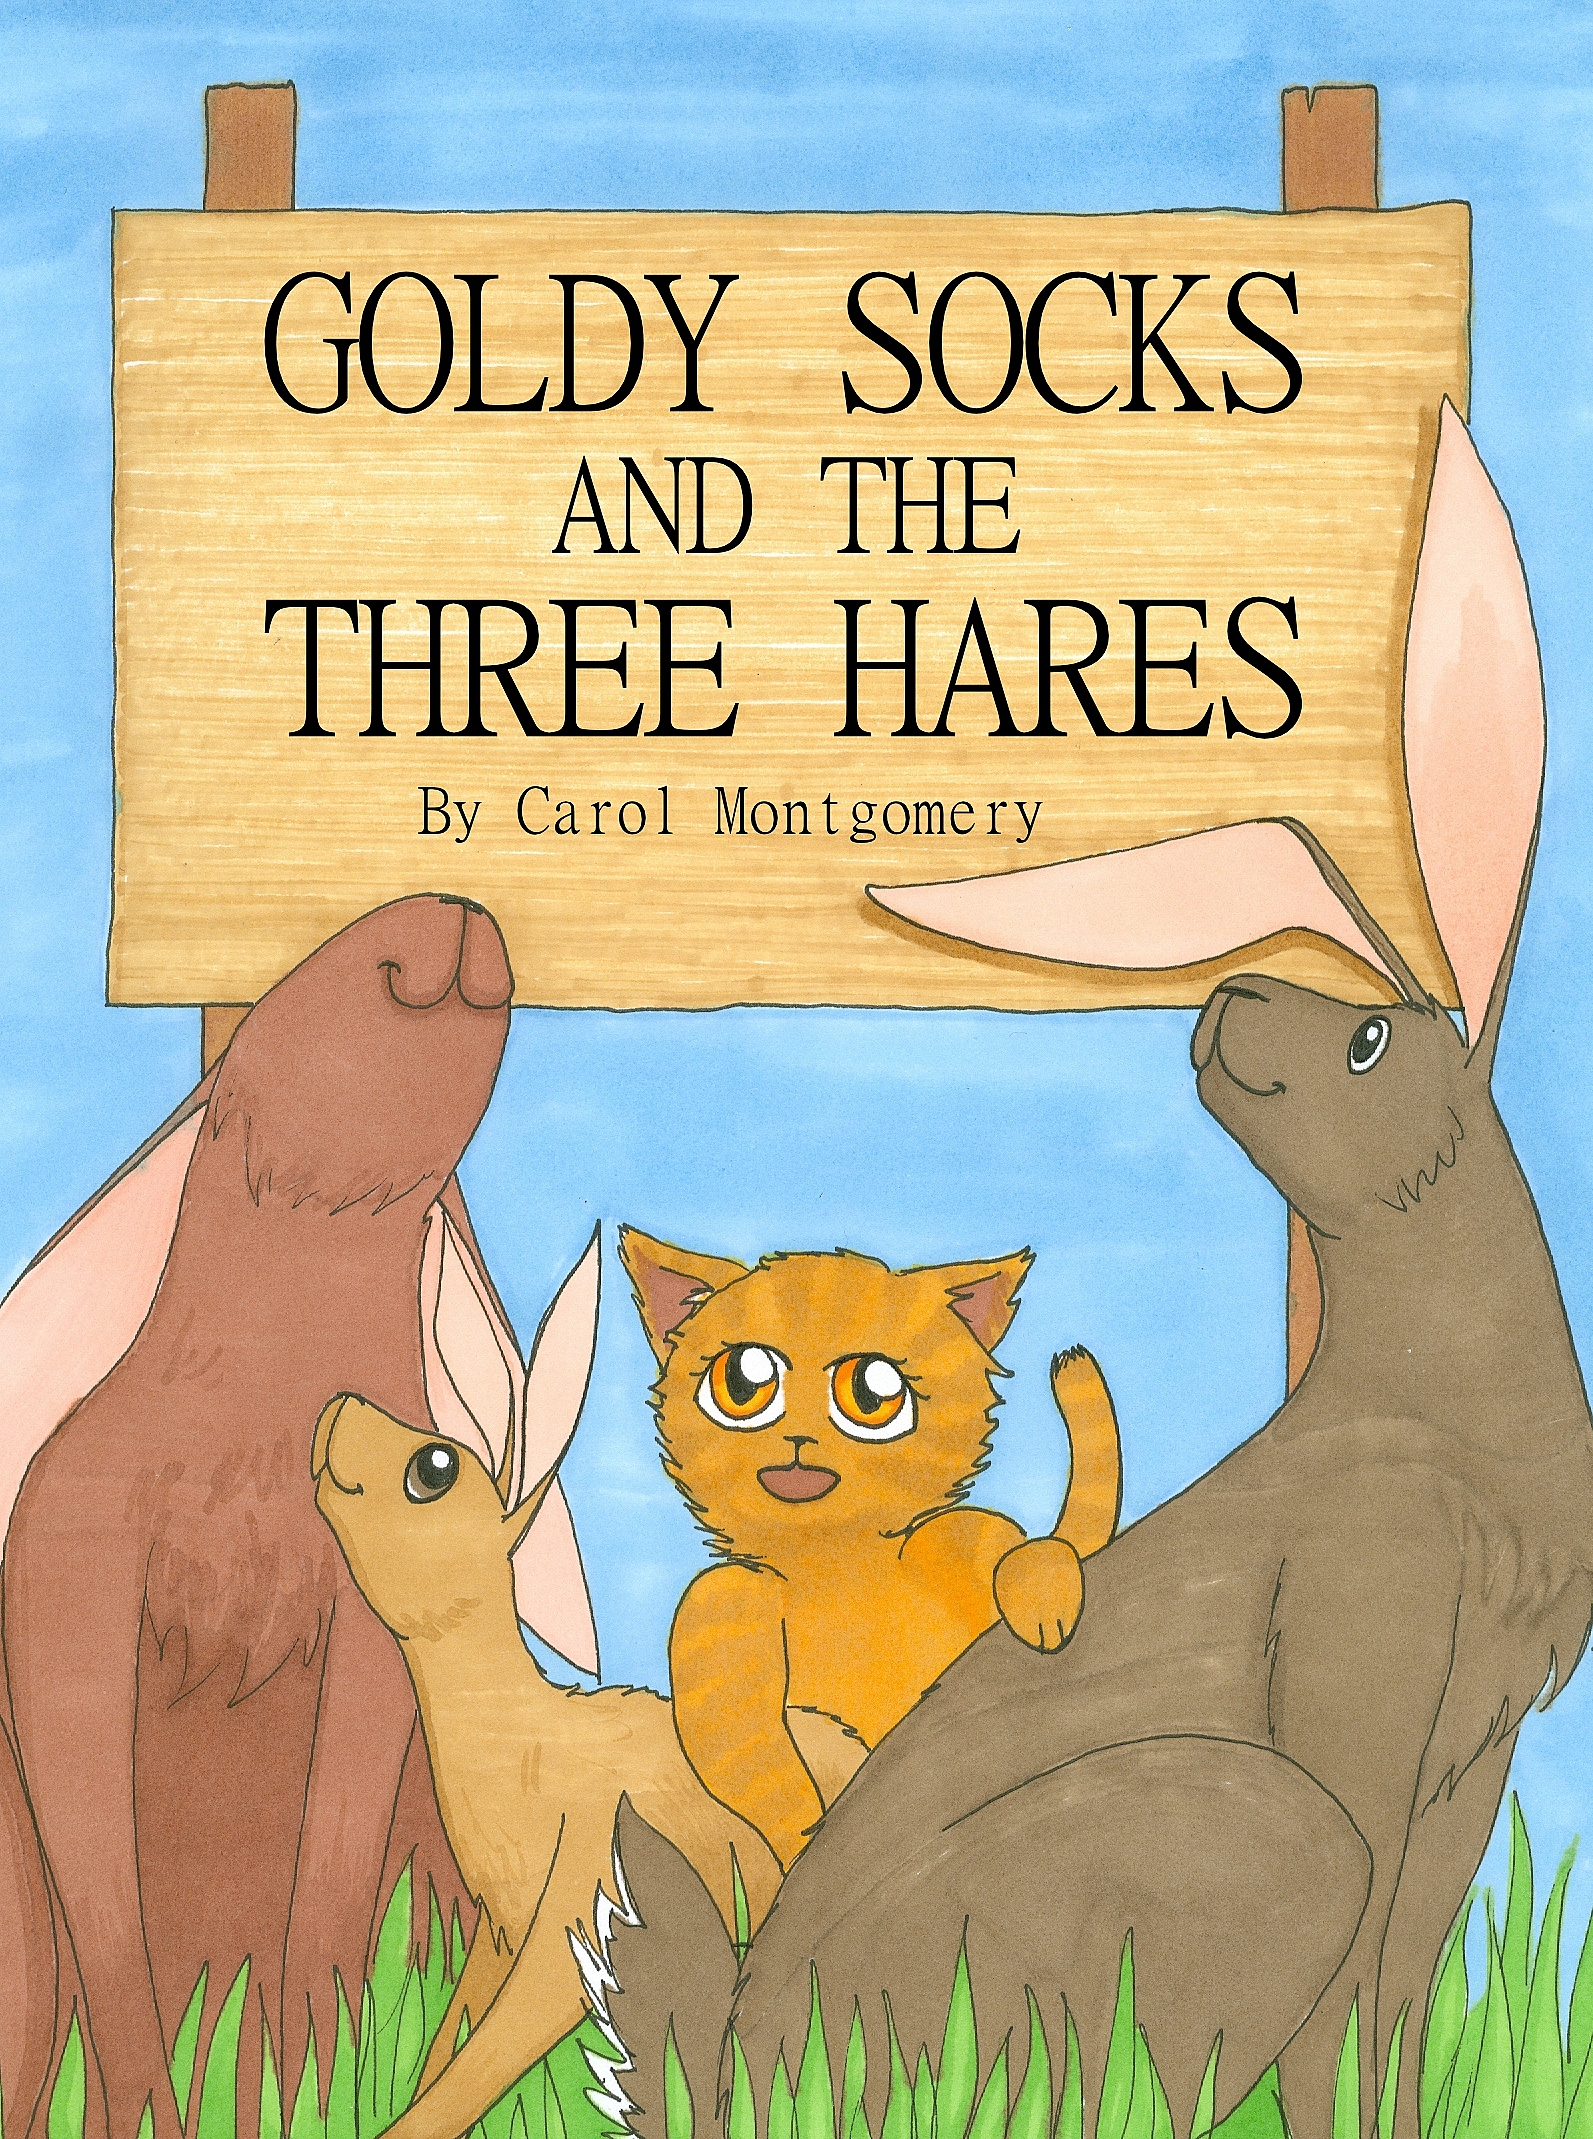 Goldy Socks and the Three Hares